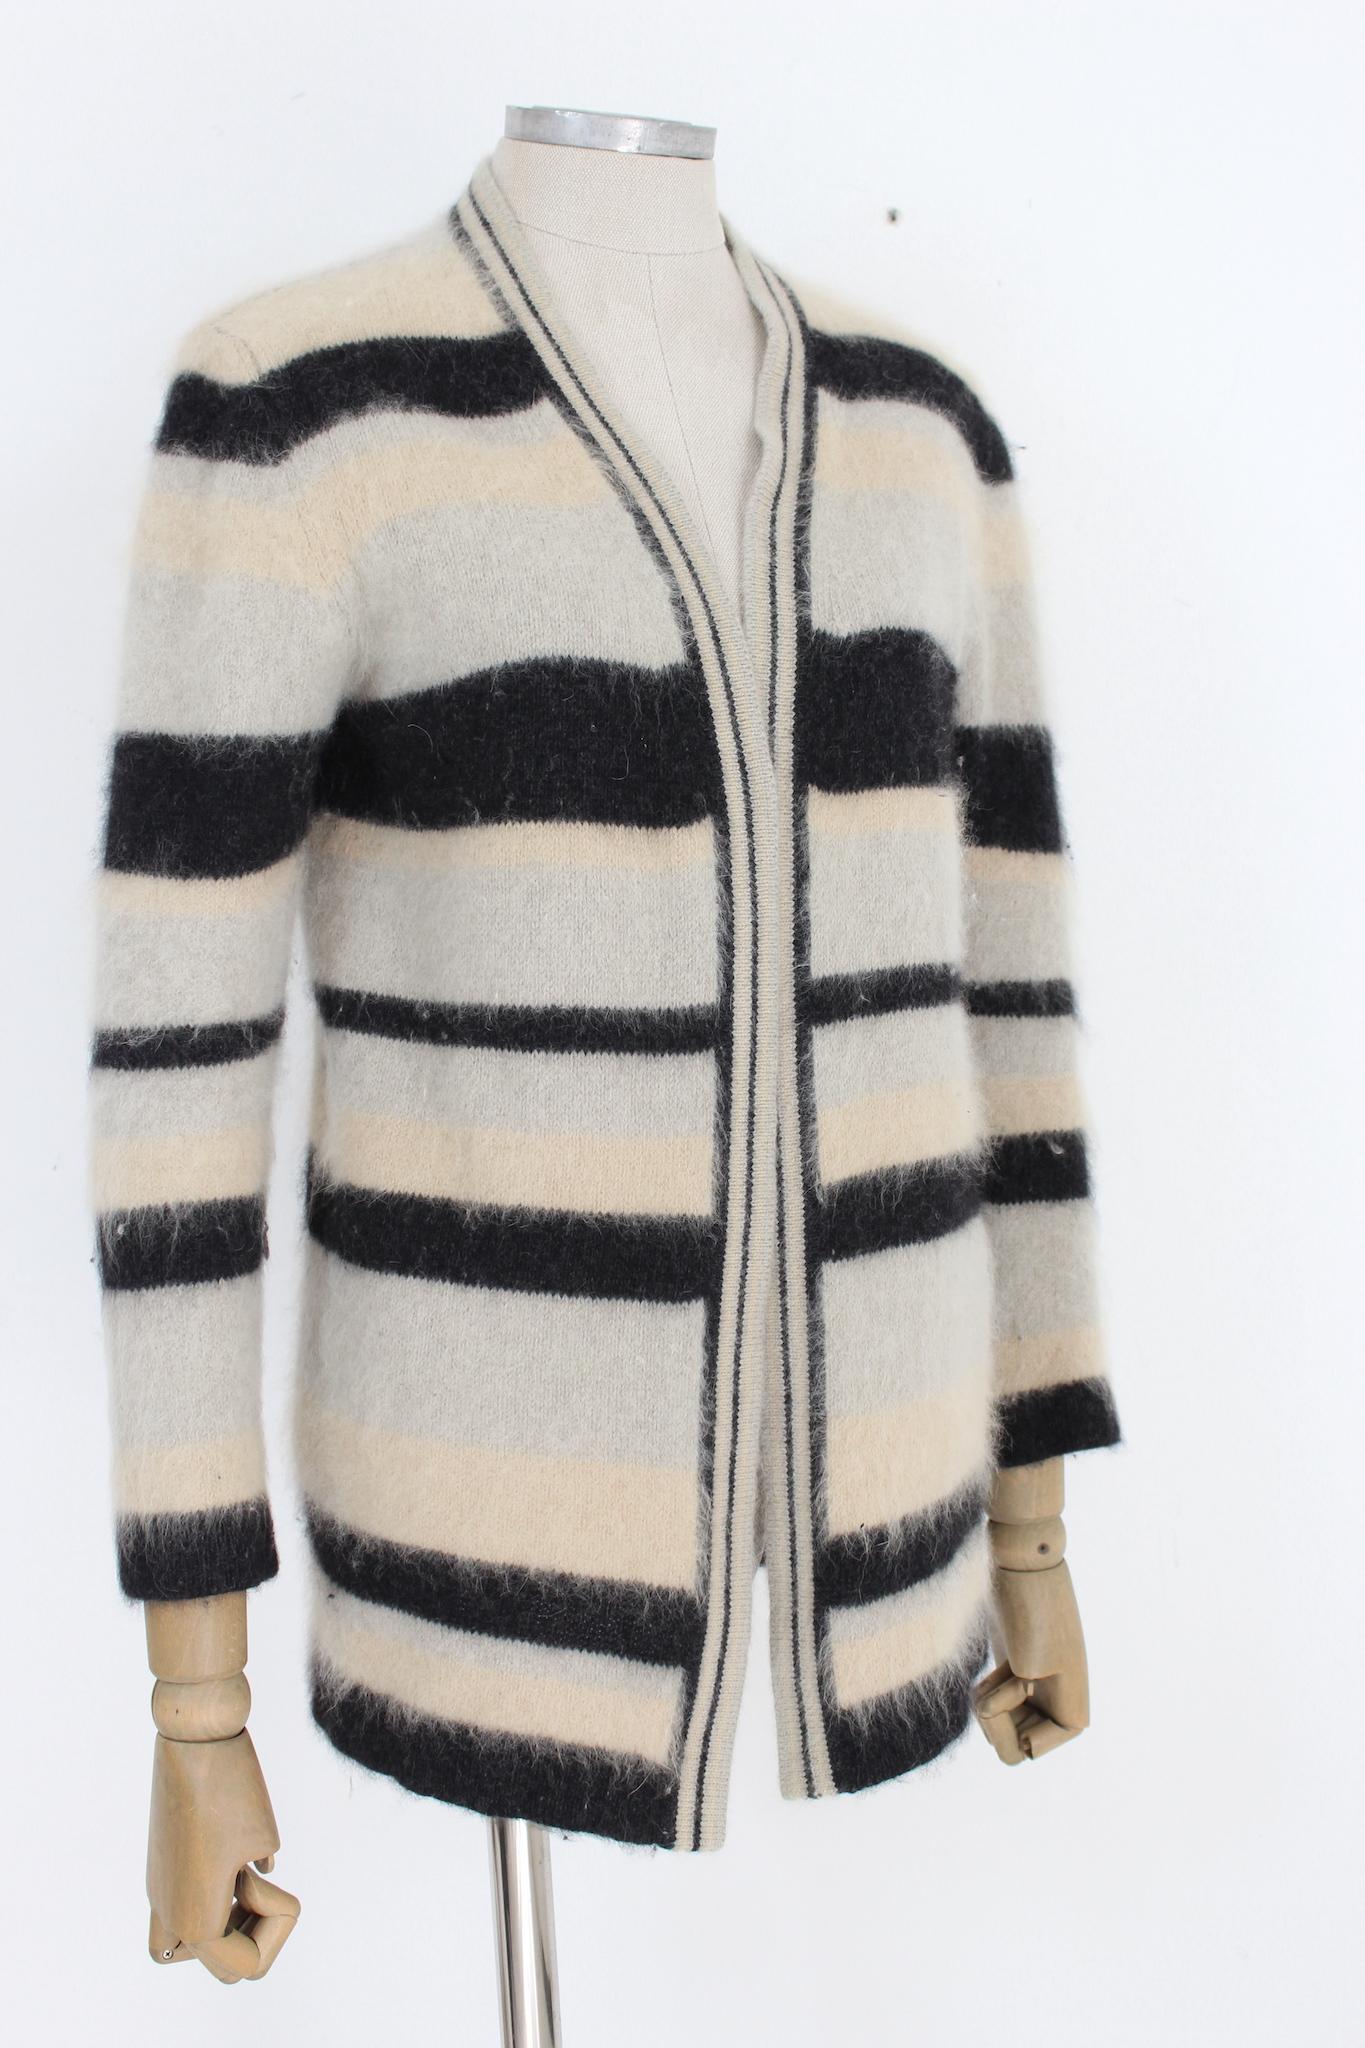 Valentino Beige Black Angora Wool Vintage Sweater 90s In Good Condition For Sale In Brindisi, Bt